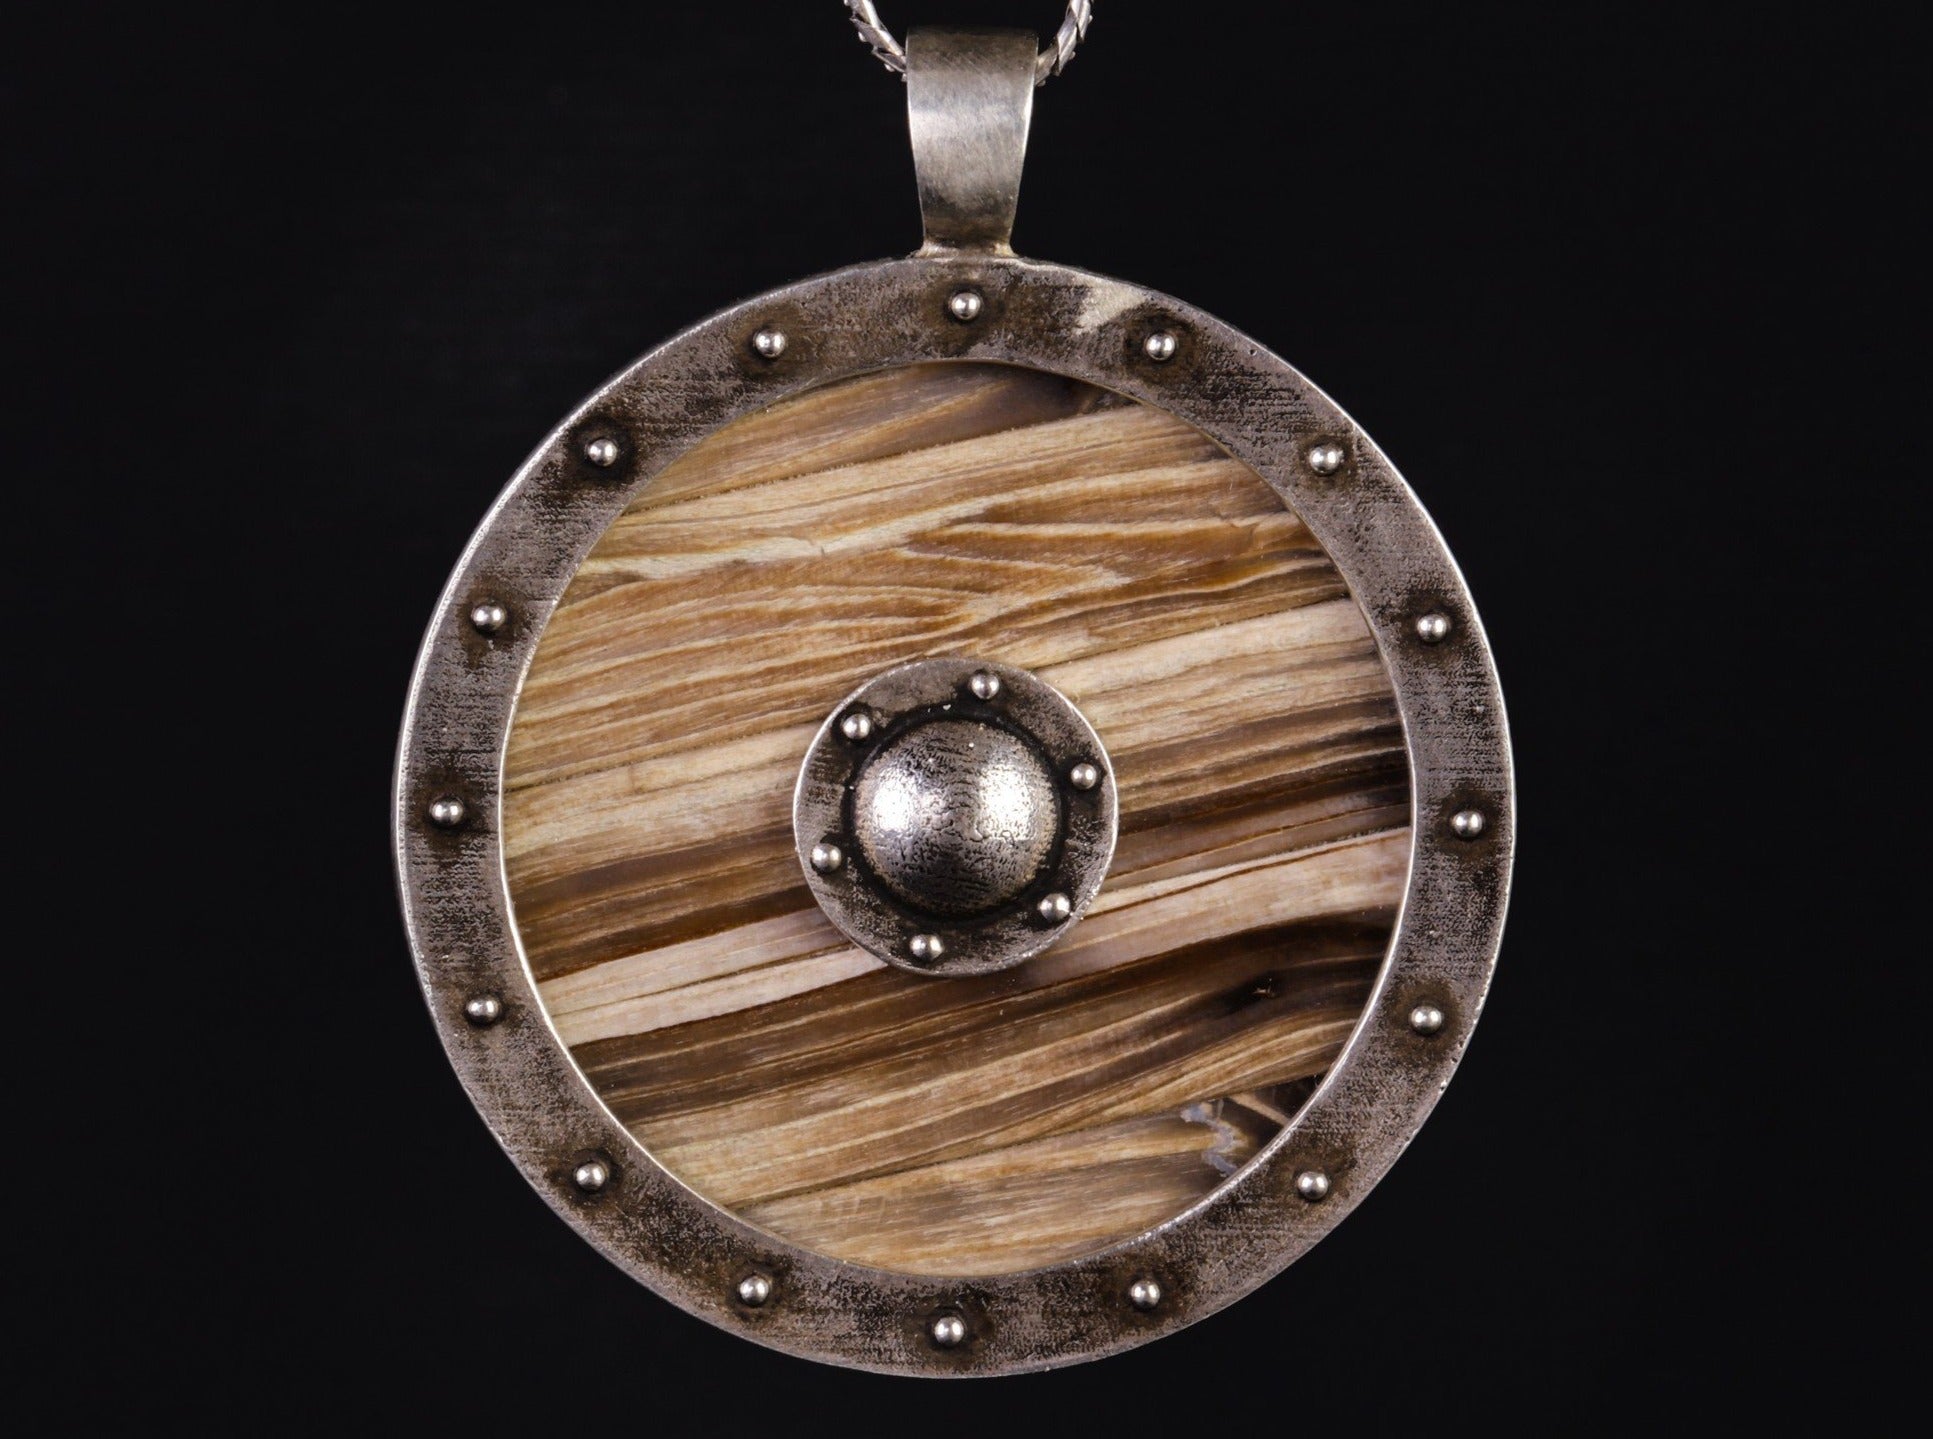  silver shield with wooden planks 